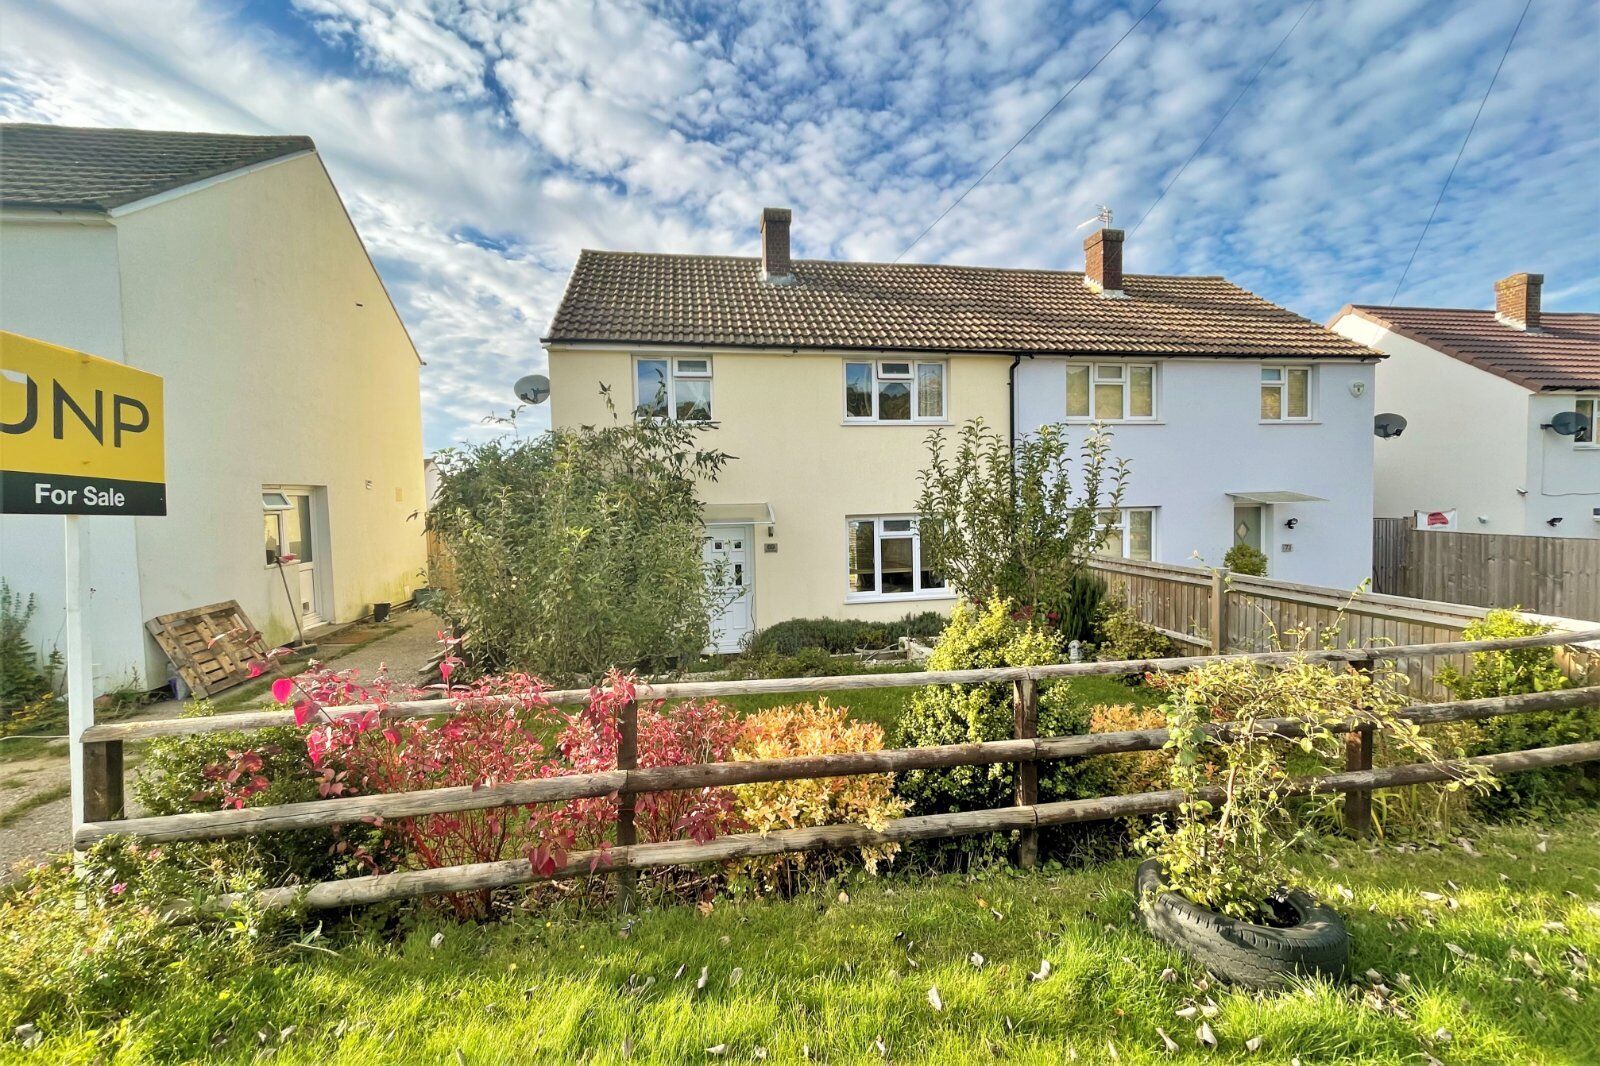 3 bedroom semi detached house for sale Eastfield Road, Princes Risborough, HP27, main image